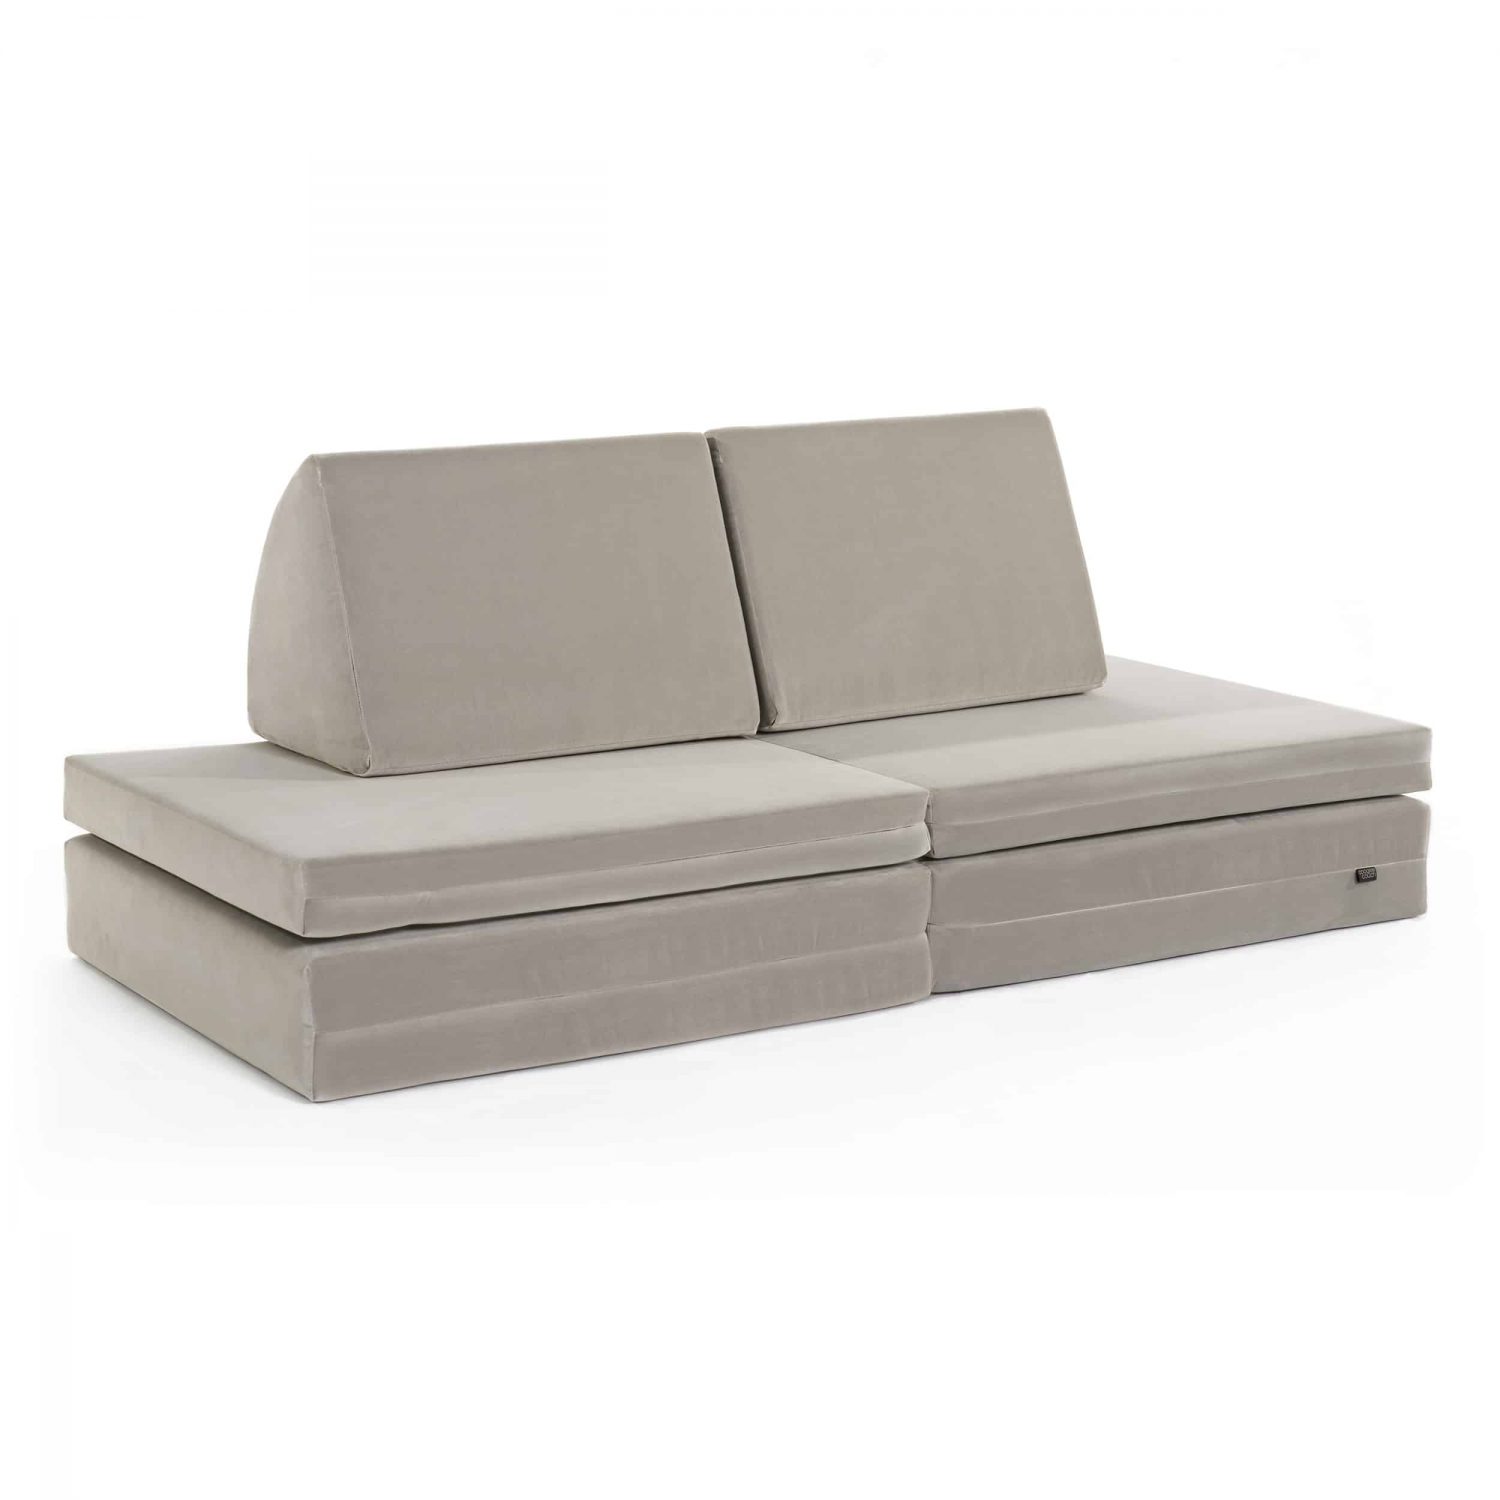 coogeecouch | kids sofa | series: fairymuchfun | color: steel-grey gray | view: front slanted | made in Germany